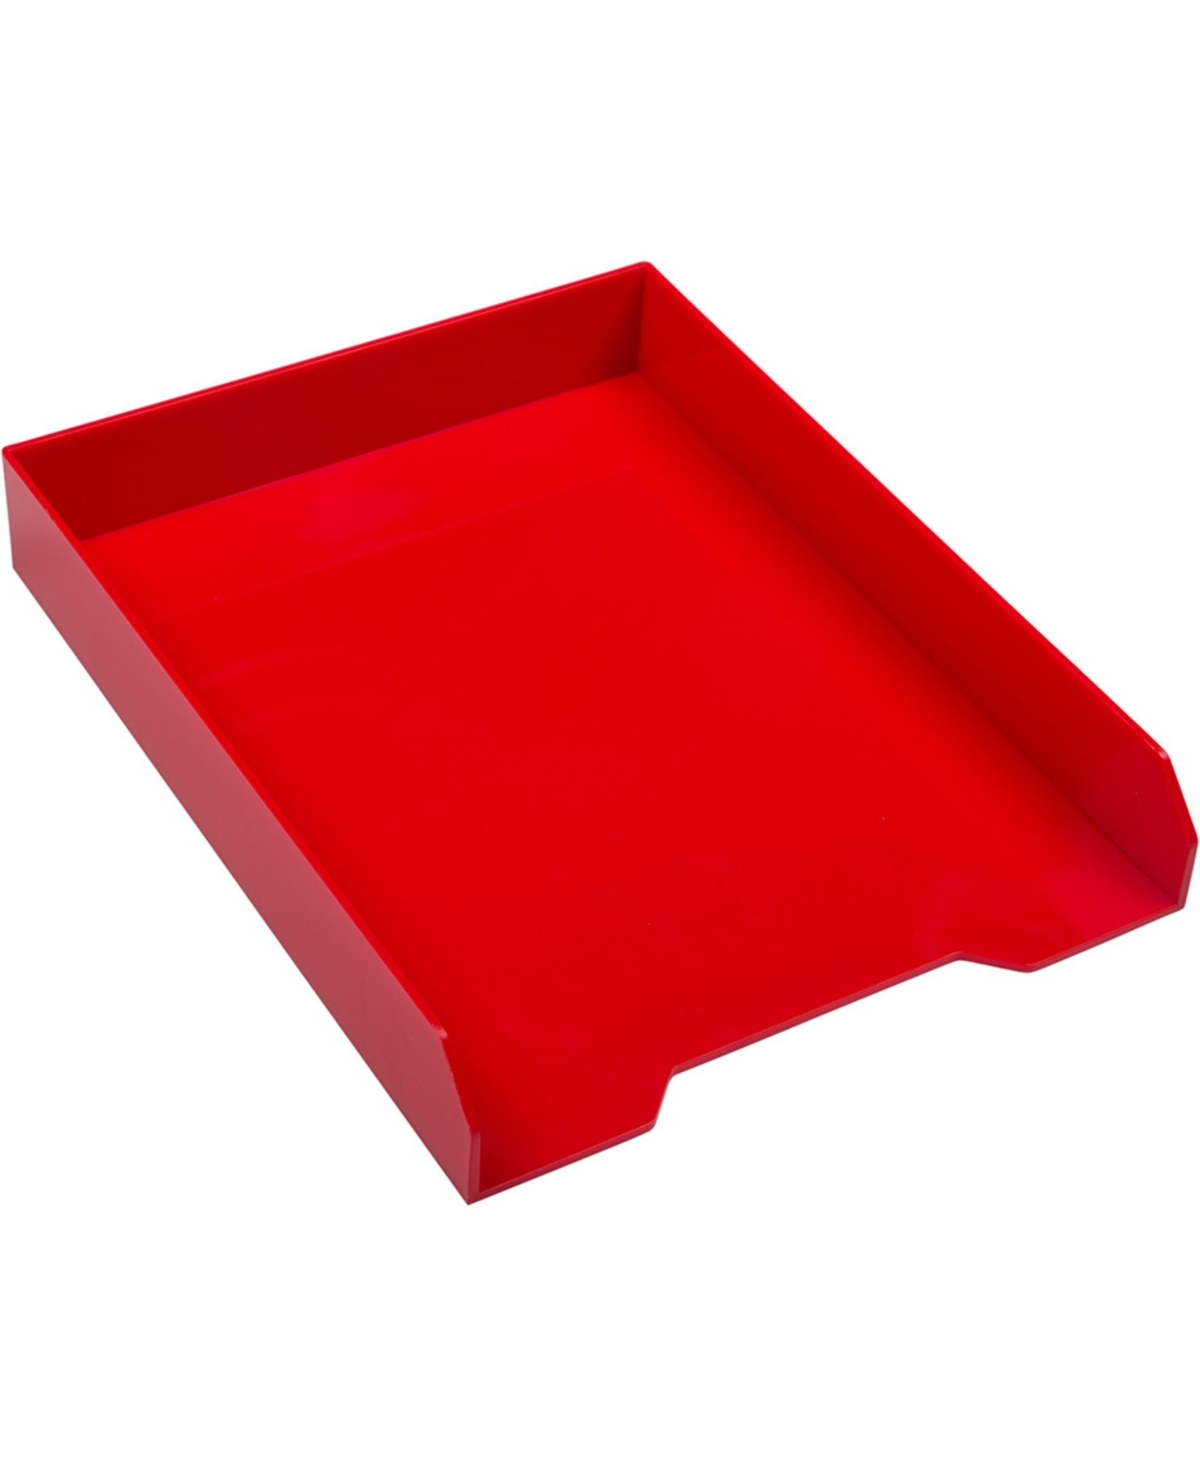 Stackable Paper Trays - Desktop Document, Letter, File Organizer Tray - Sold Individually - Red